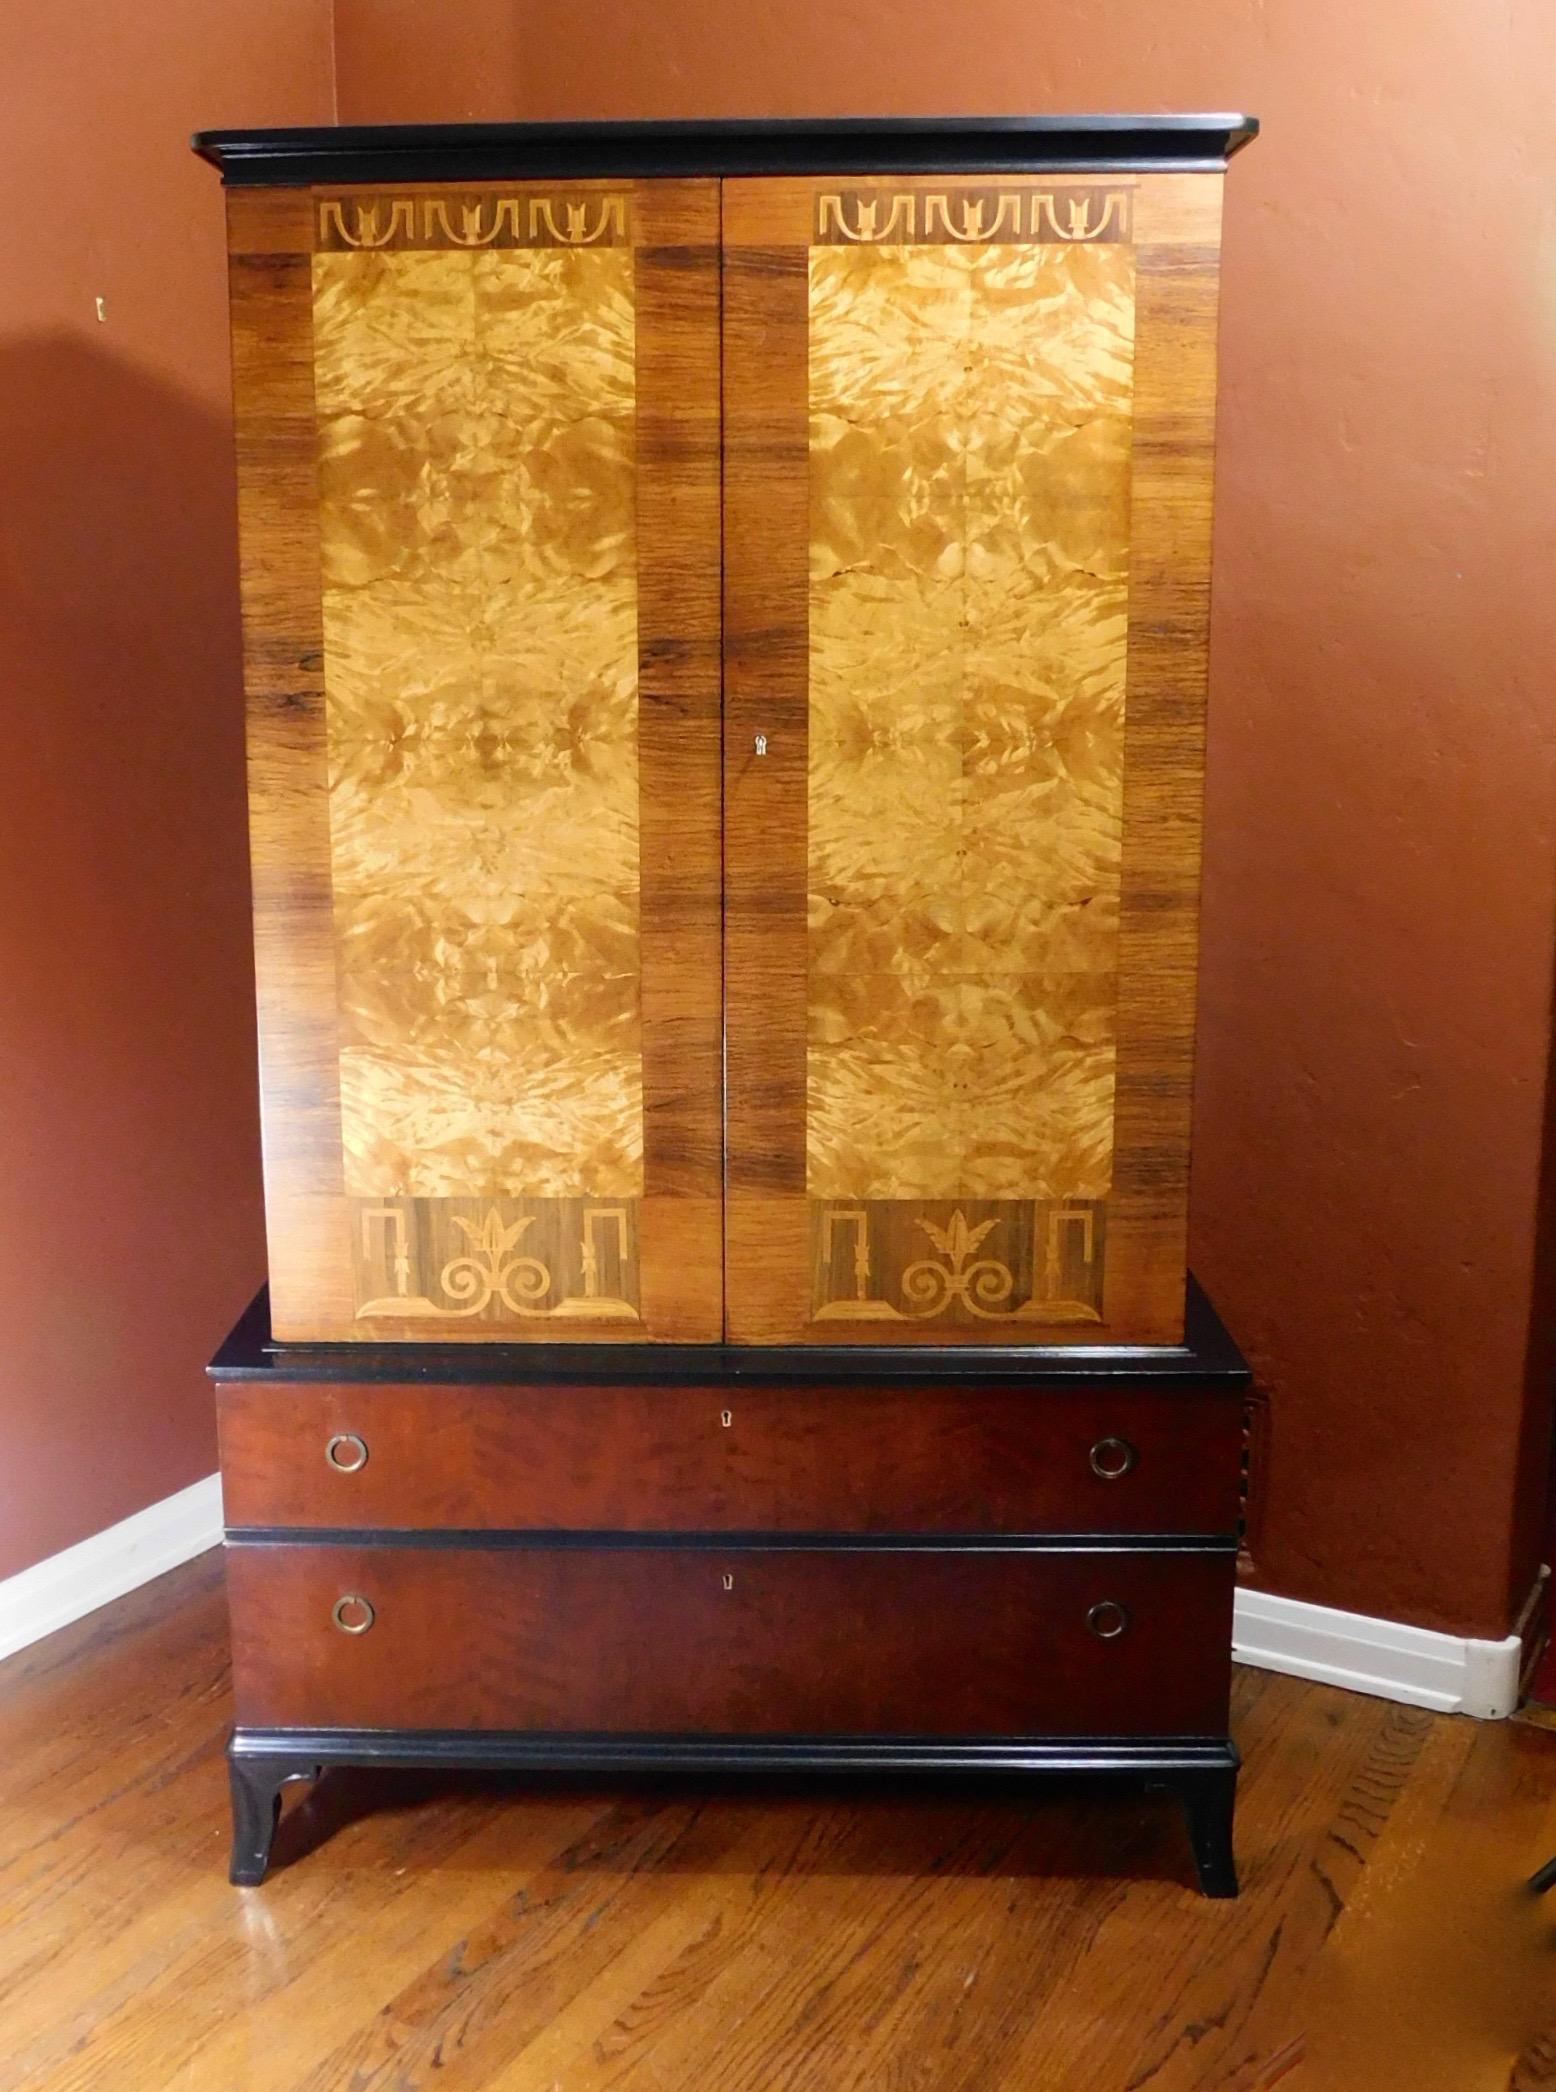 Superb Swedish Art Deco era inlaid storage cabinet crafted in book-matched, highly figured golden flame birch. Inlaid in rosewood, elm and pear woods.
These intricate neoclassical inlaid friezes are in Chambert's signature style.
Interior with two